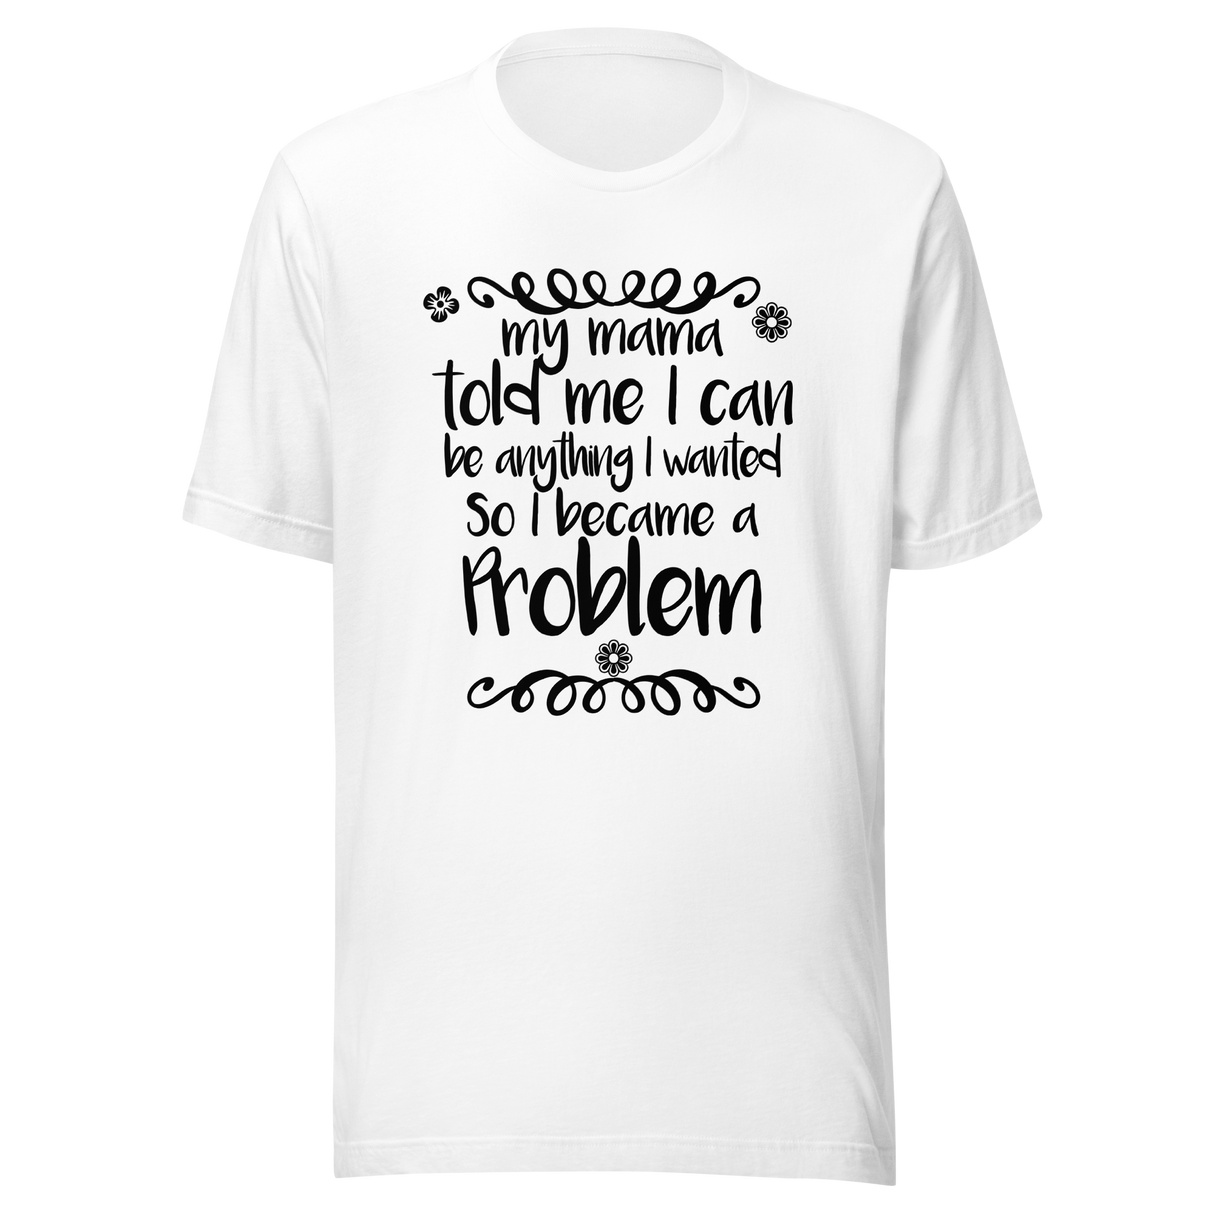 my-mama-told-me-i-can-be-whatever-i-wanted-so-i-became-a-problem-mama-tee-problem-t-shirt-funny-tee-t-shirt-tee#color_white